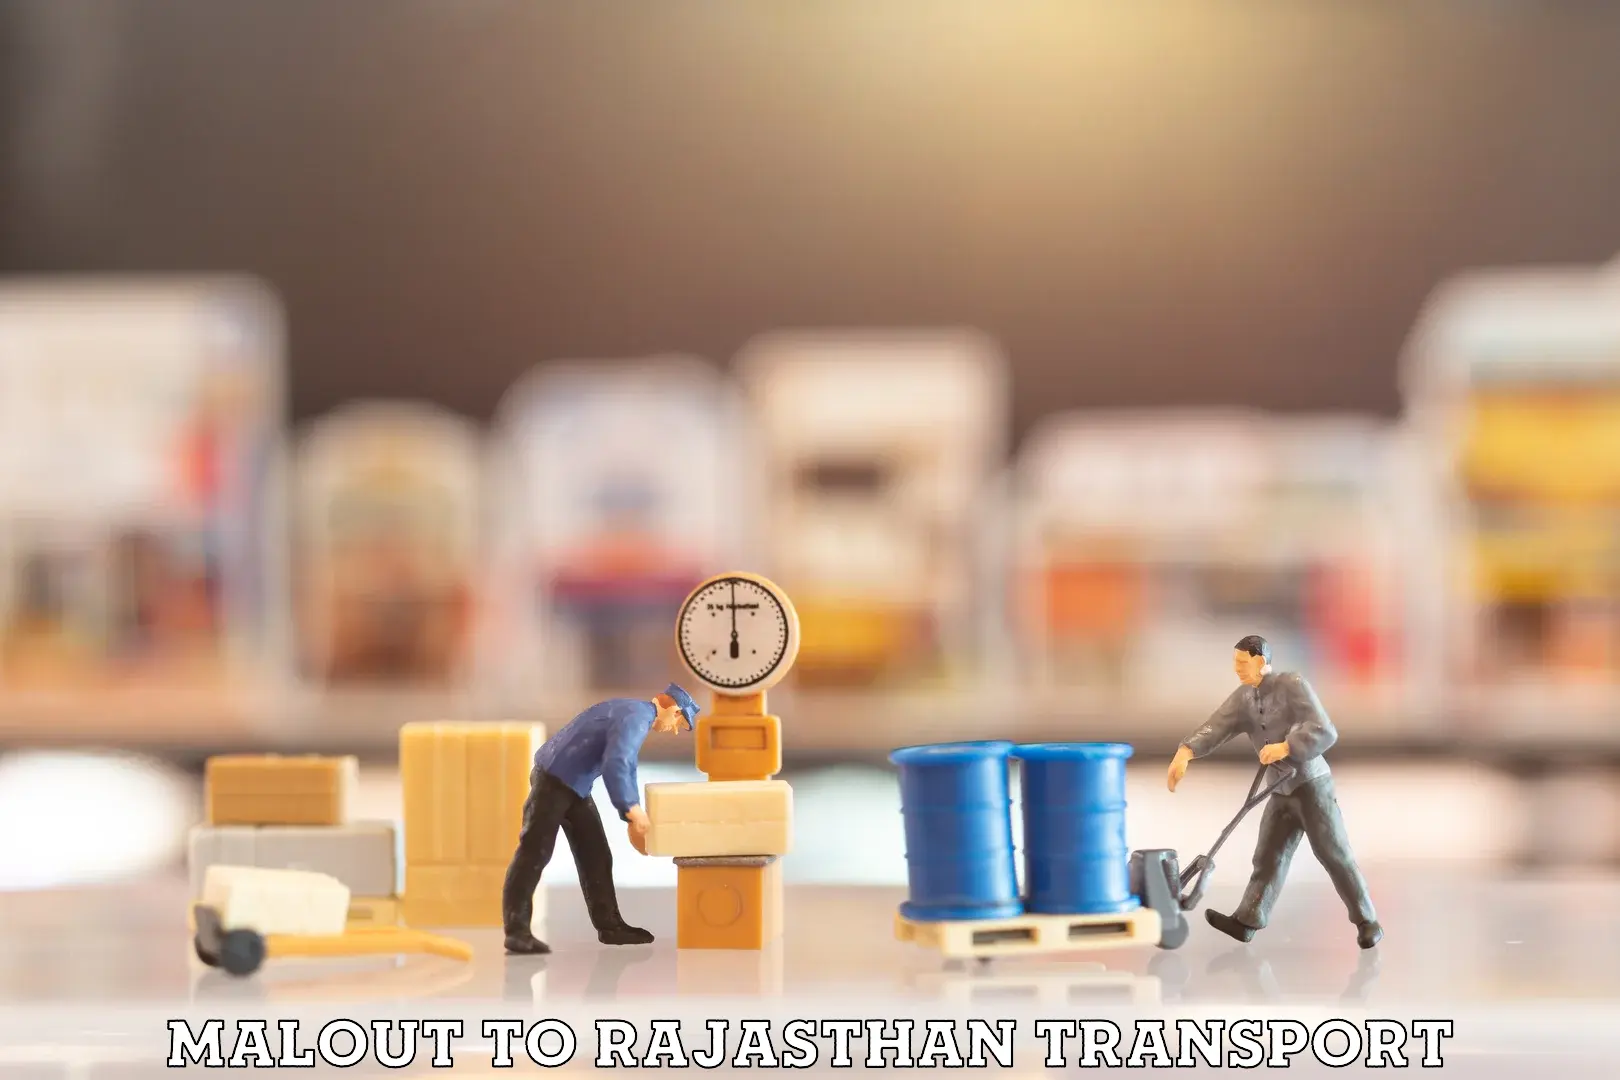 Transport in sharing Malout to Rajasthan